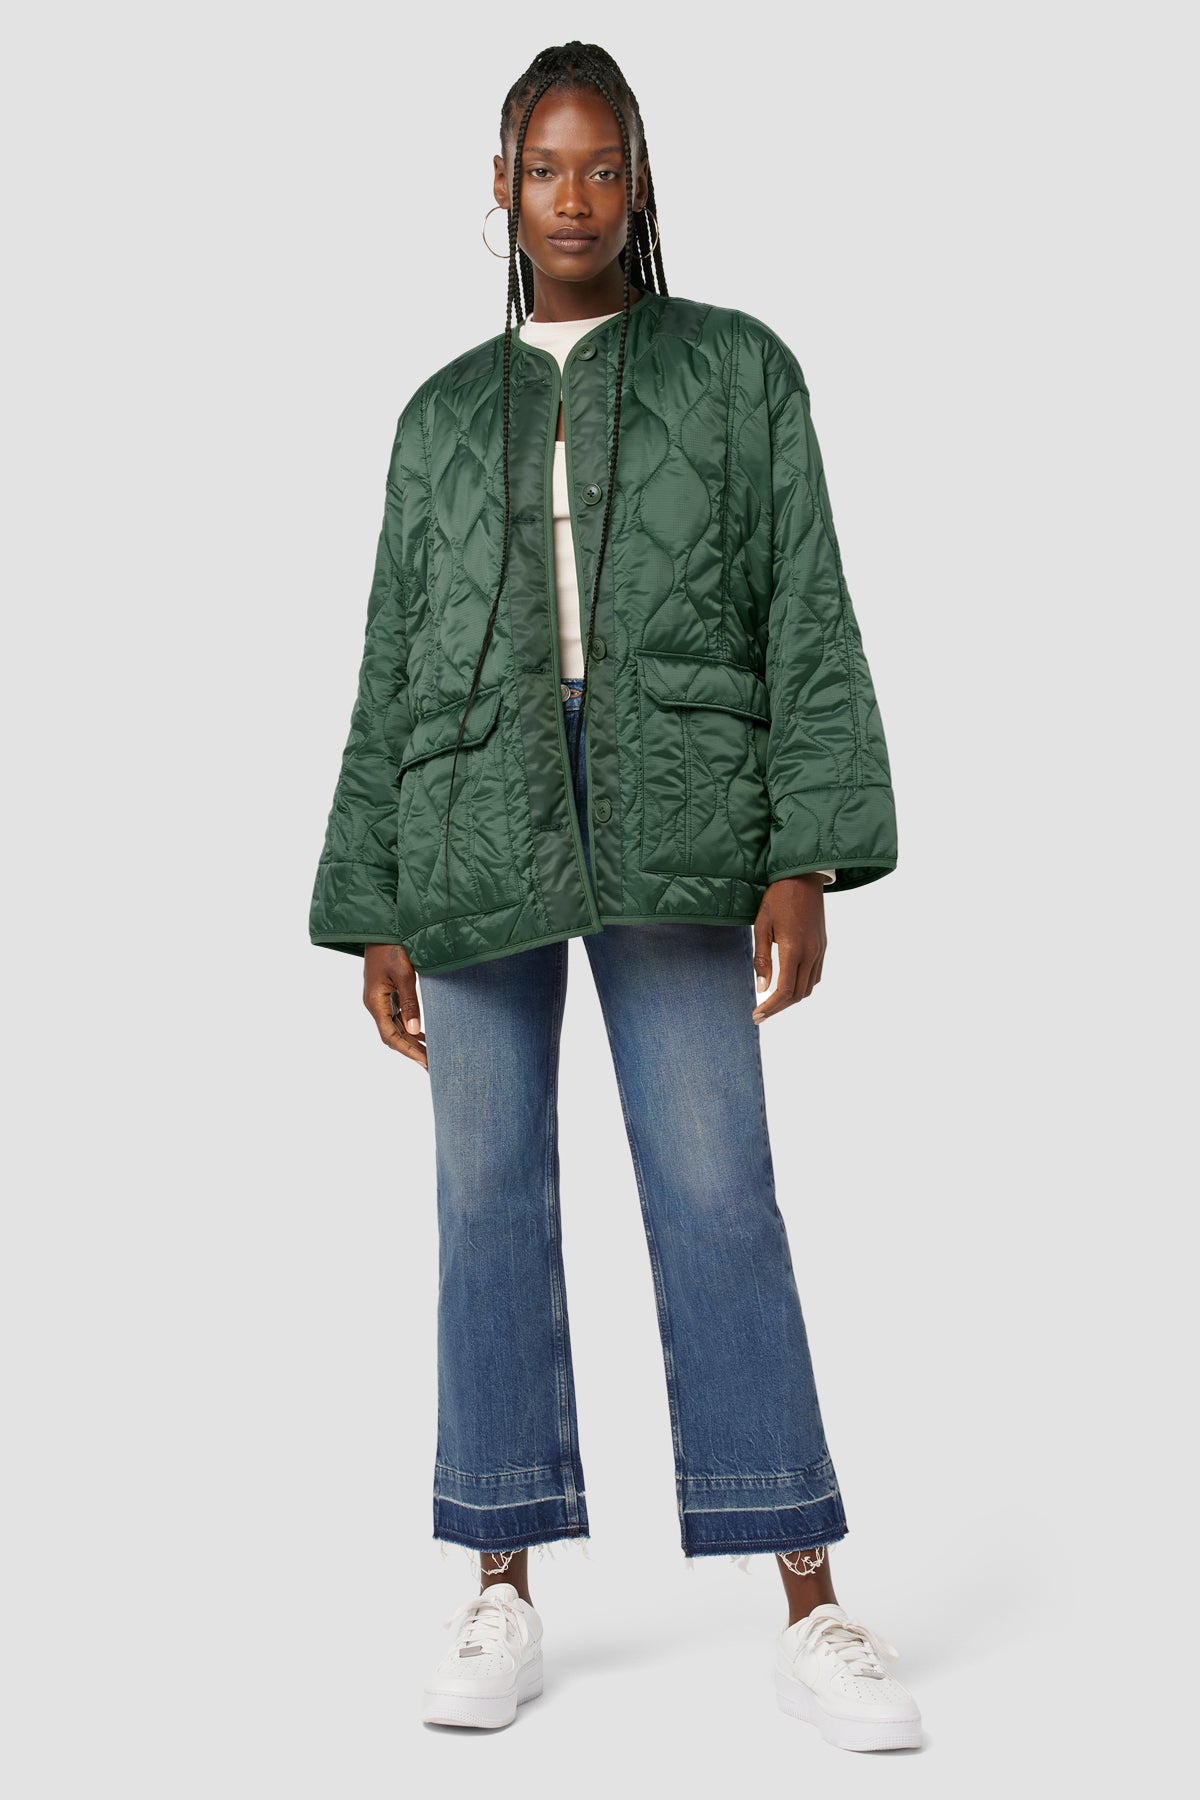 Hudson Jeans Oversized Quilted Liner Jacket - Green - Small